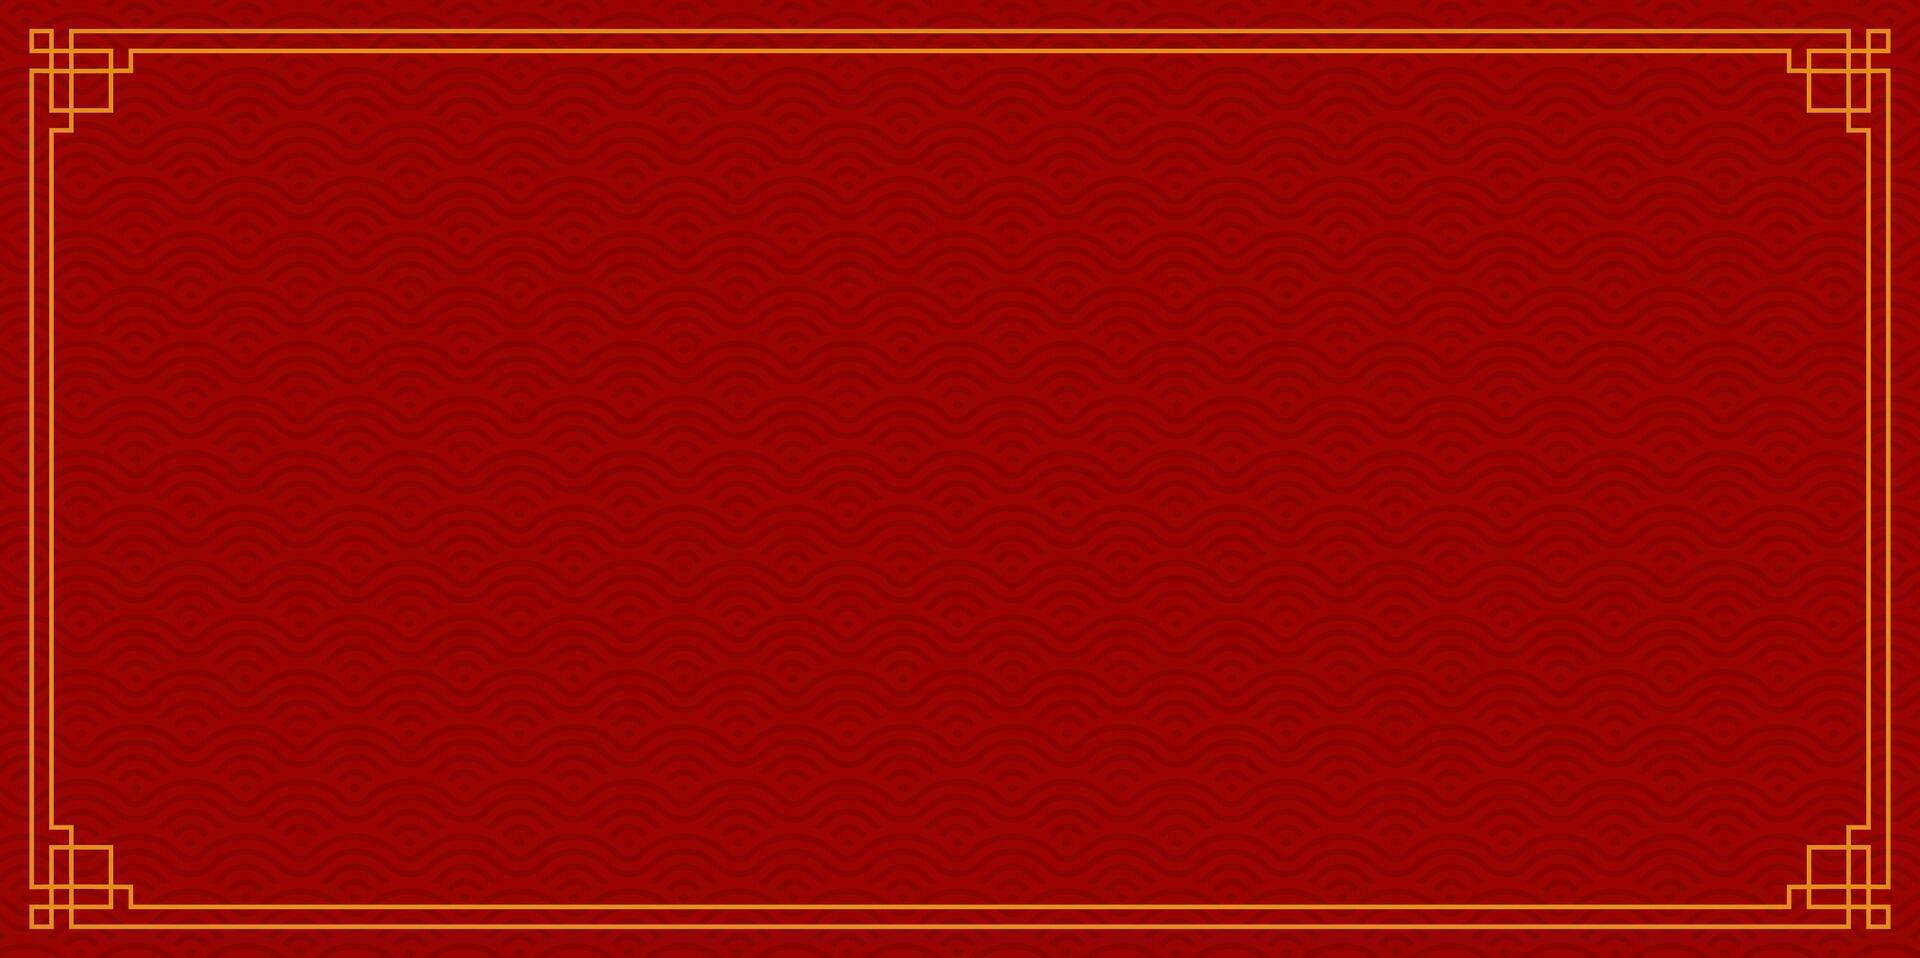 Chinese banner frame border. vector illustration element. Chinese new year traditional decor design